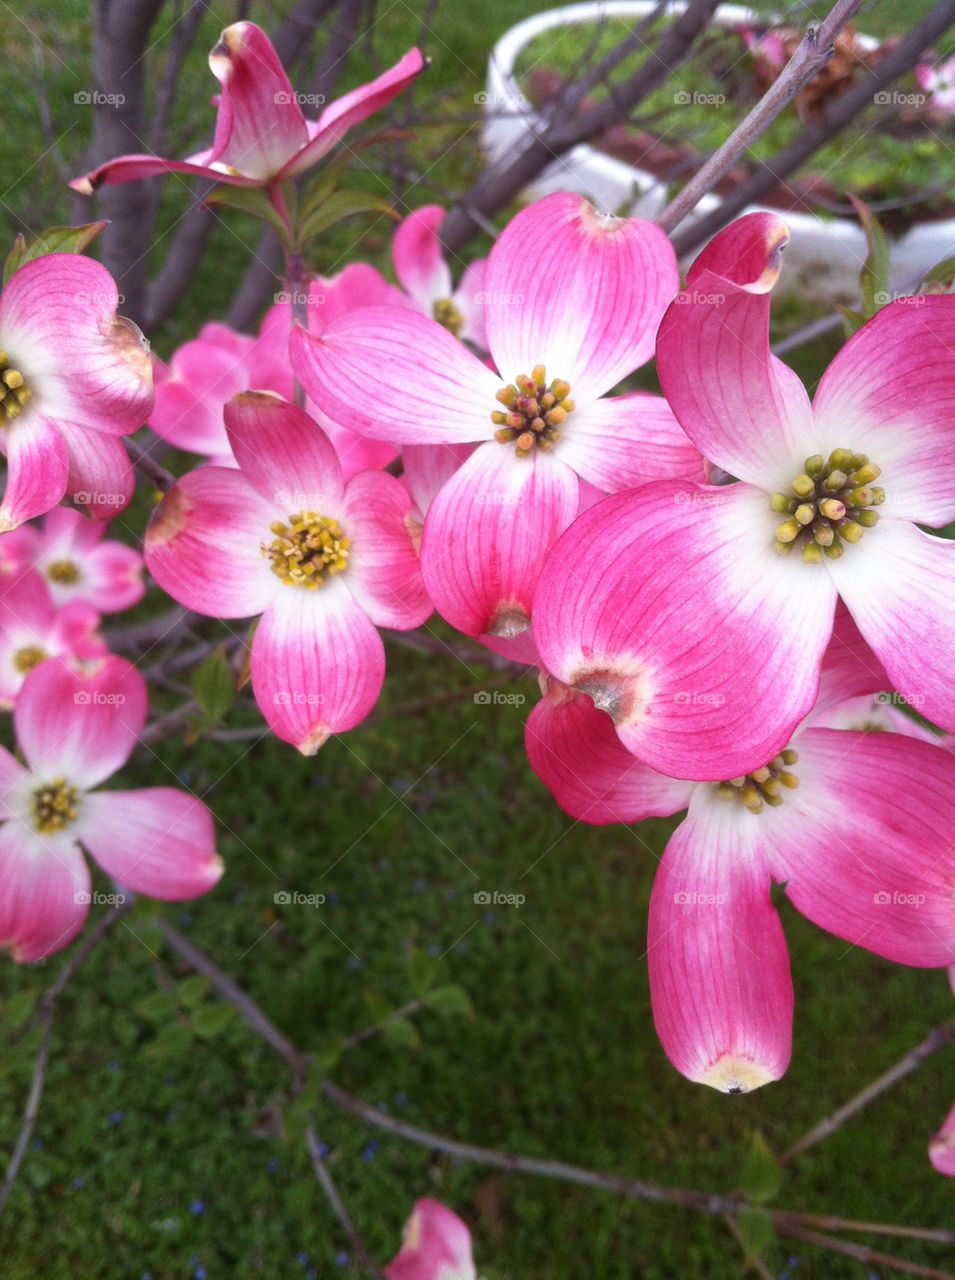 Dogwood In Da Pink. Dogwood tree, first signs of spring